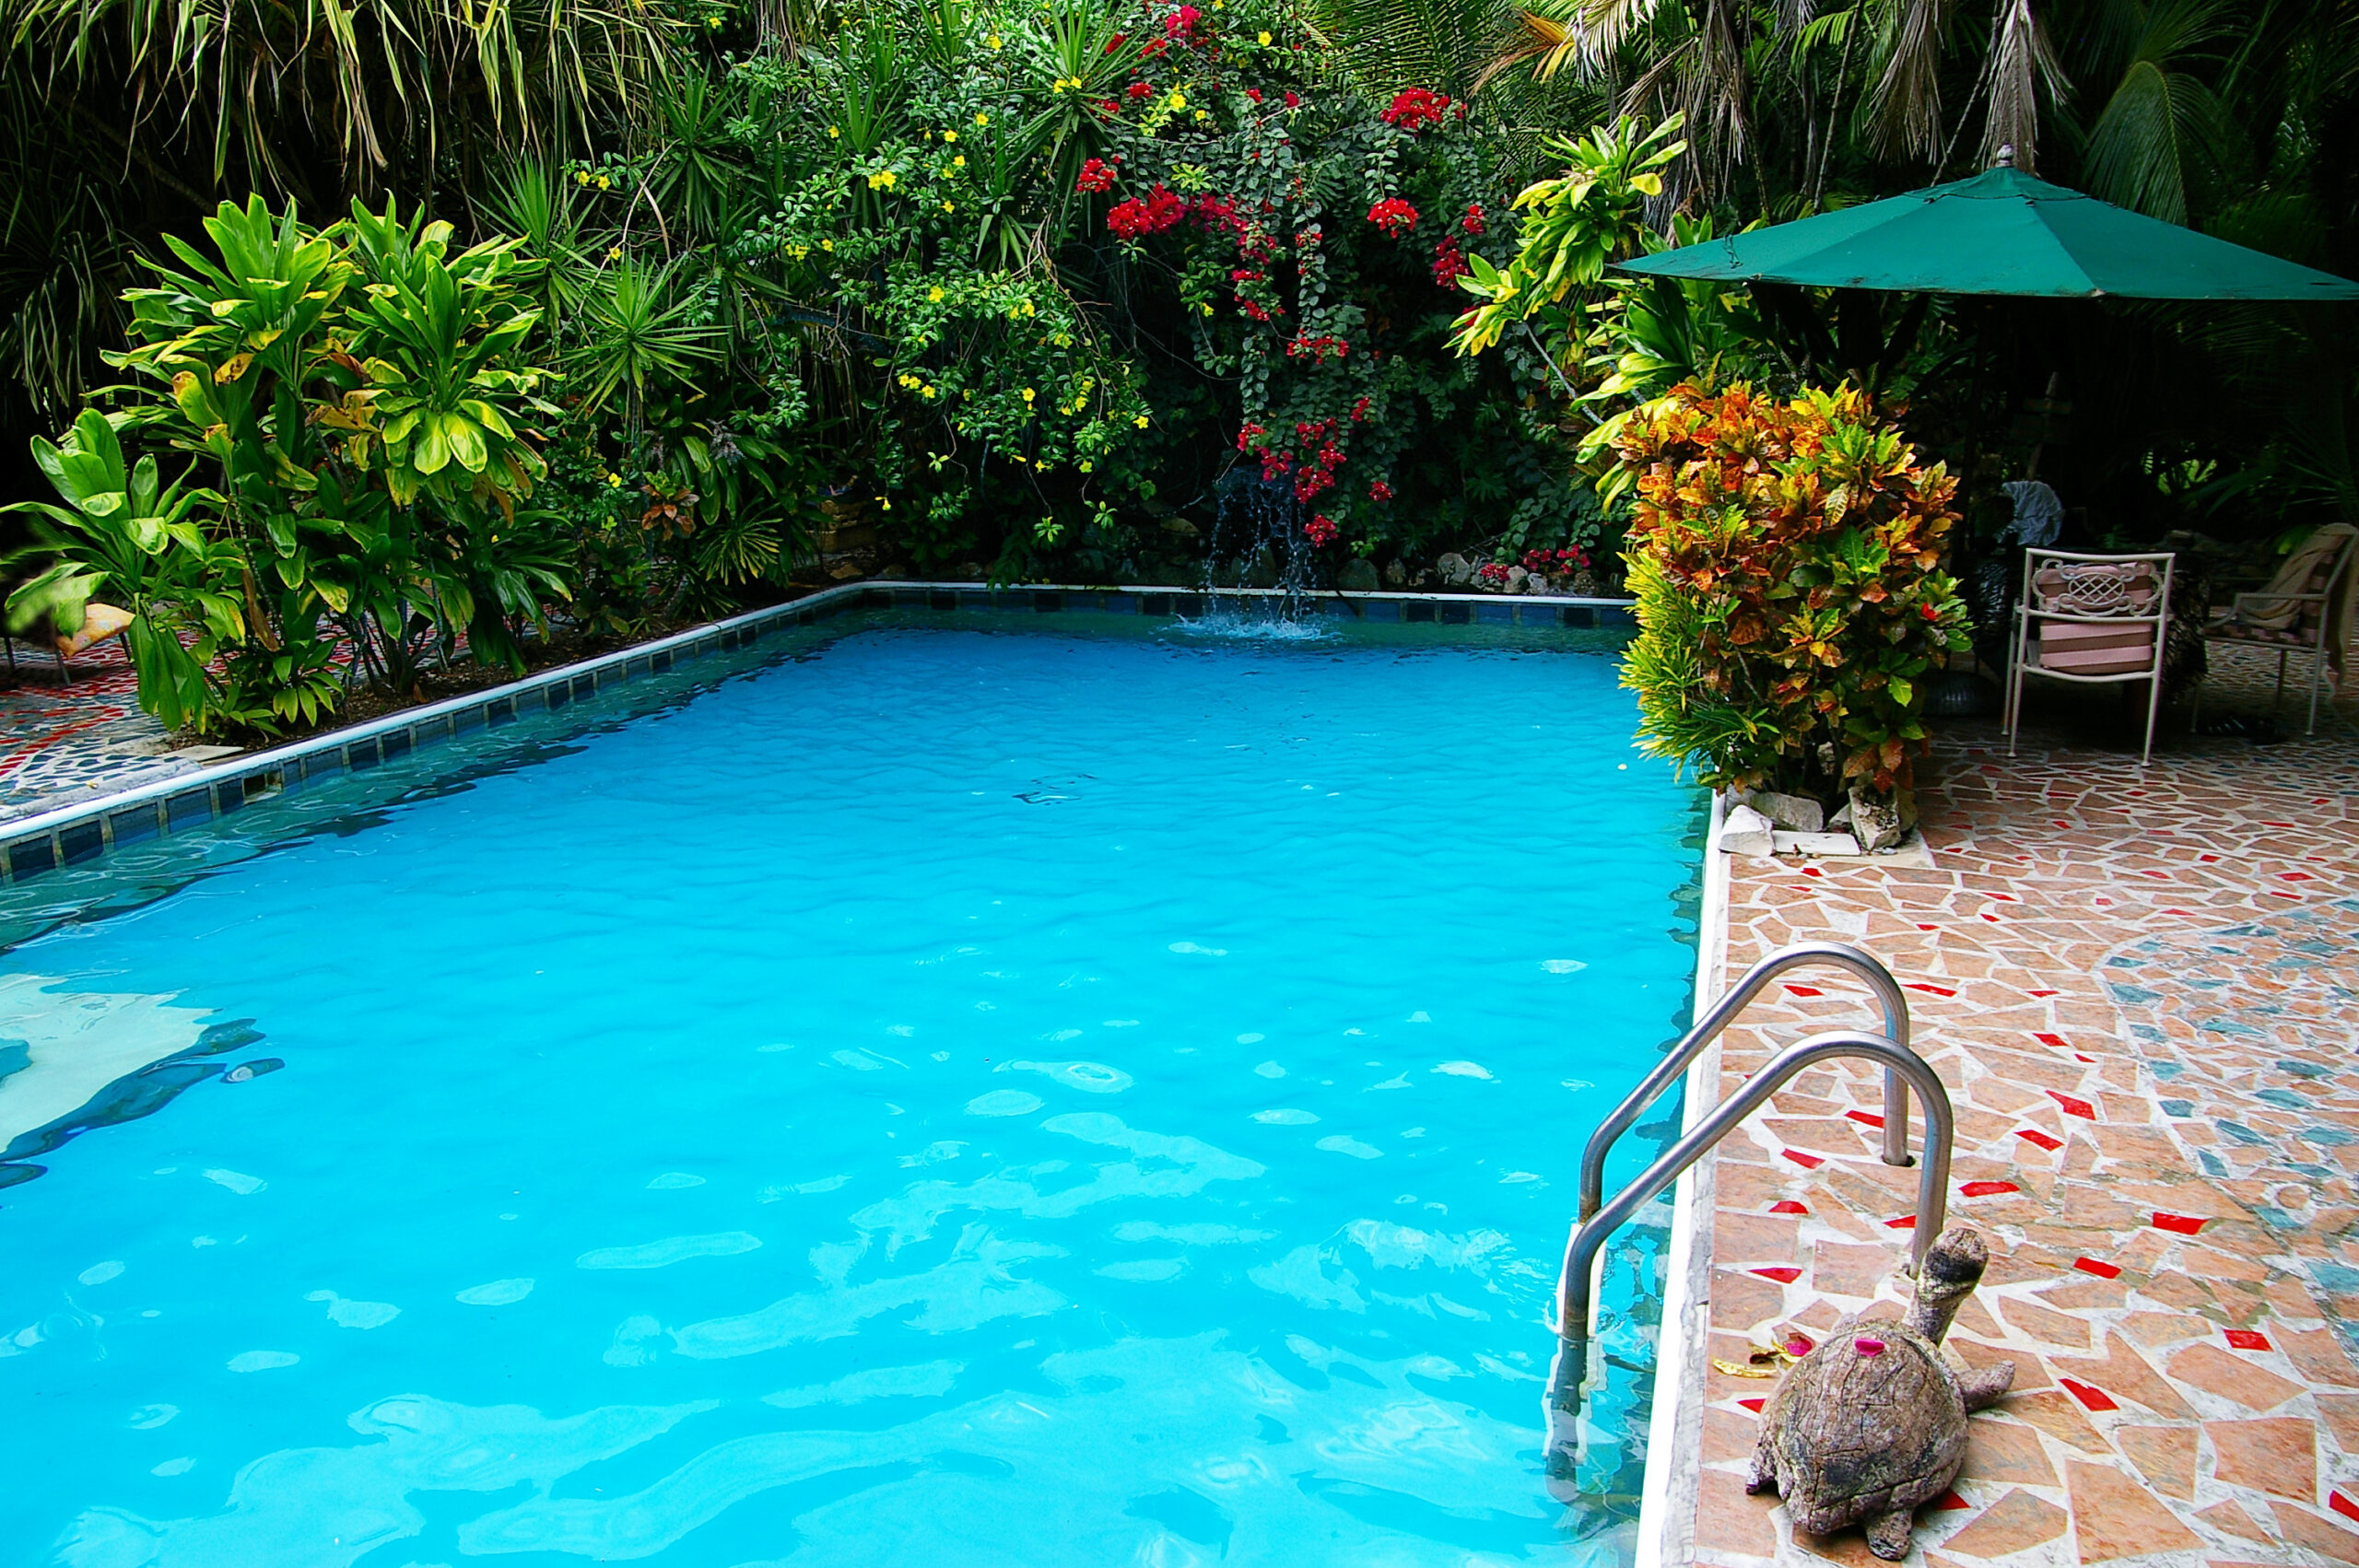 Tropical swimming pool surrounded by green plants